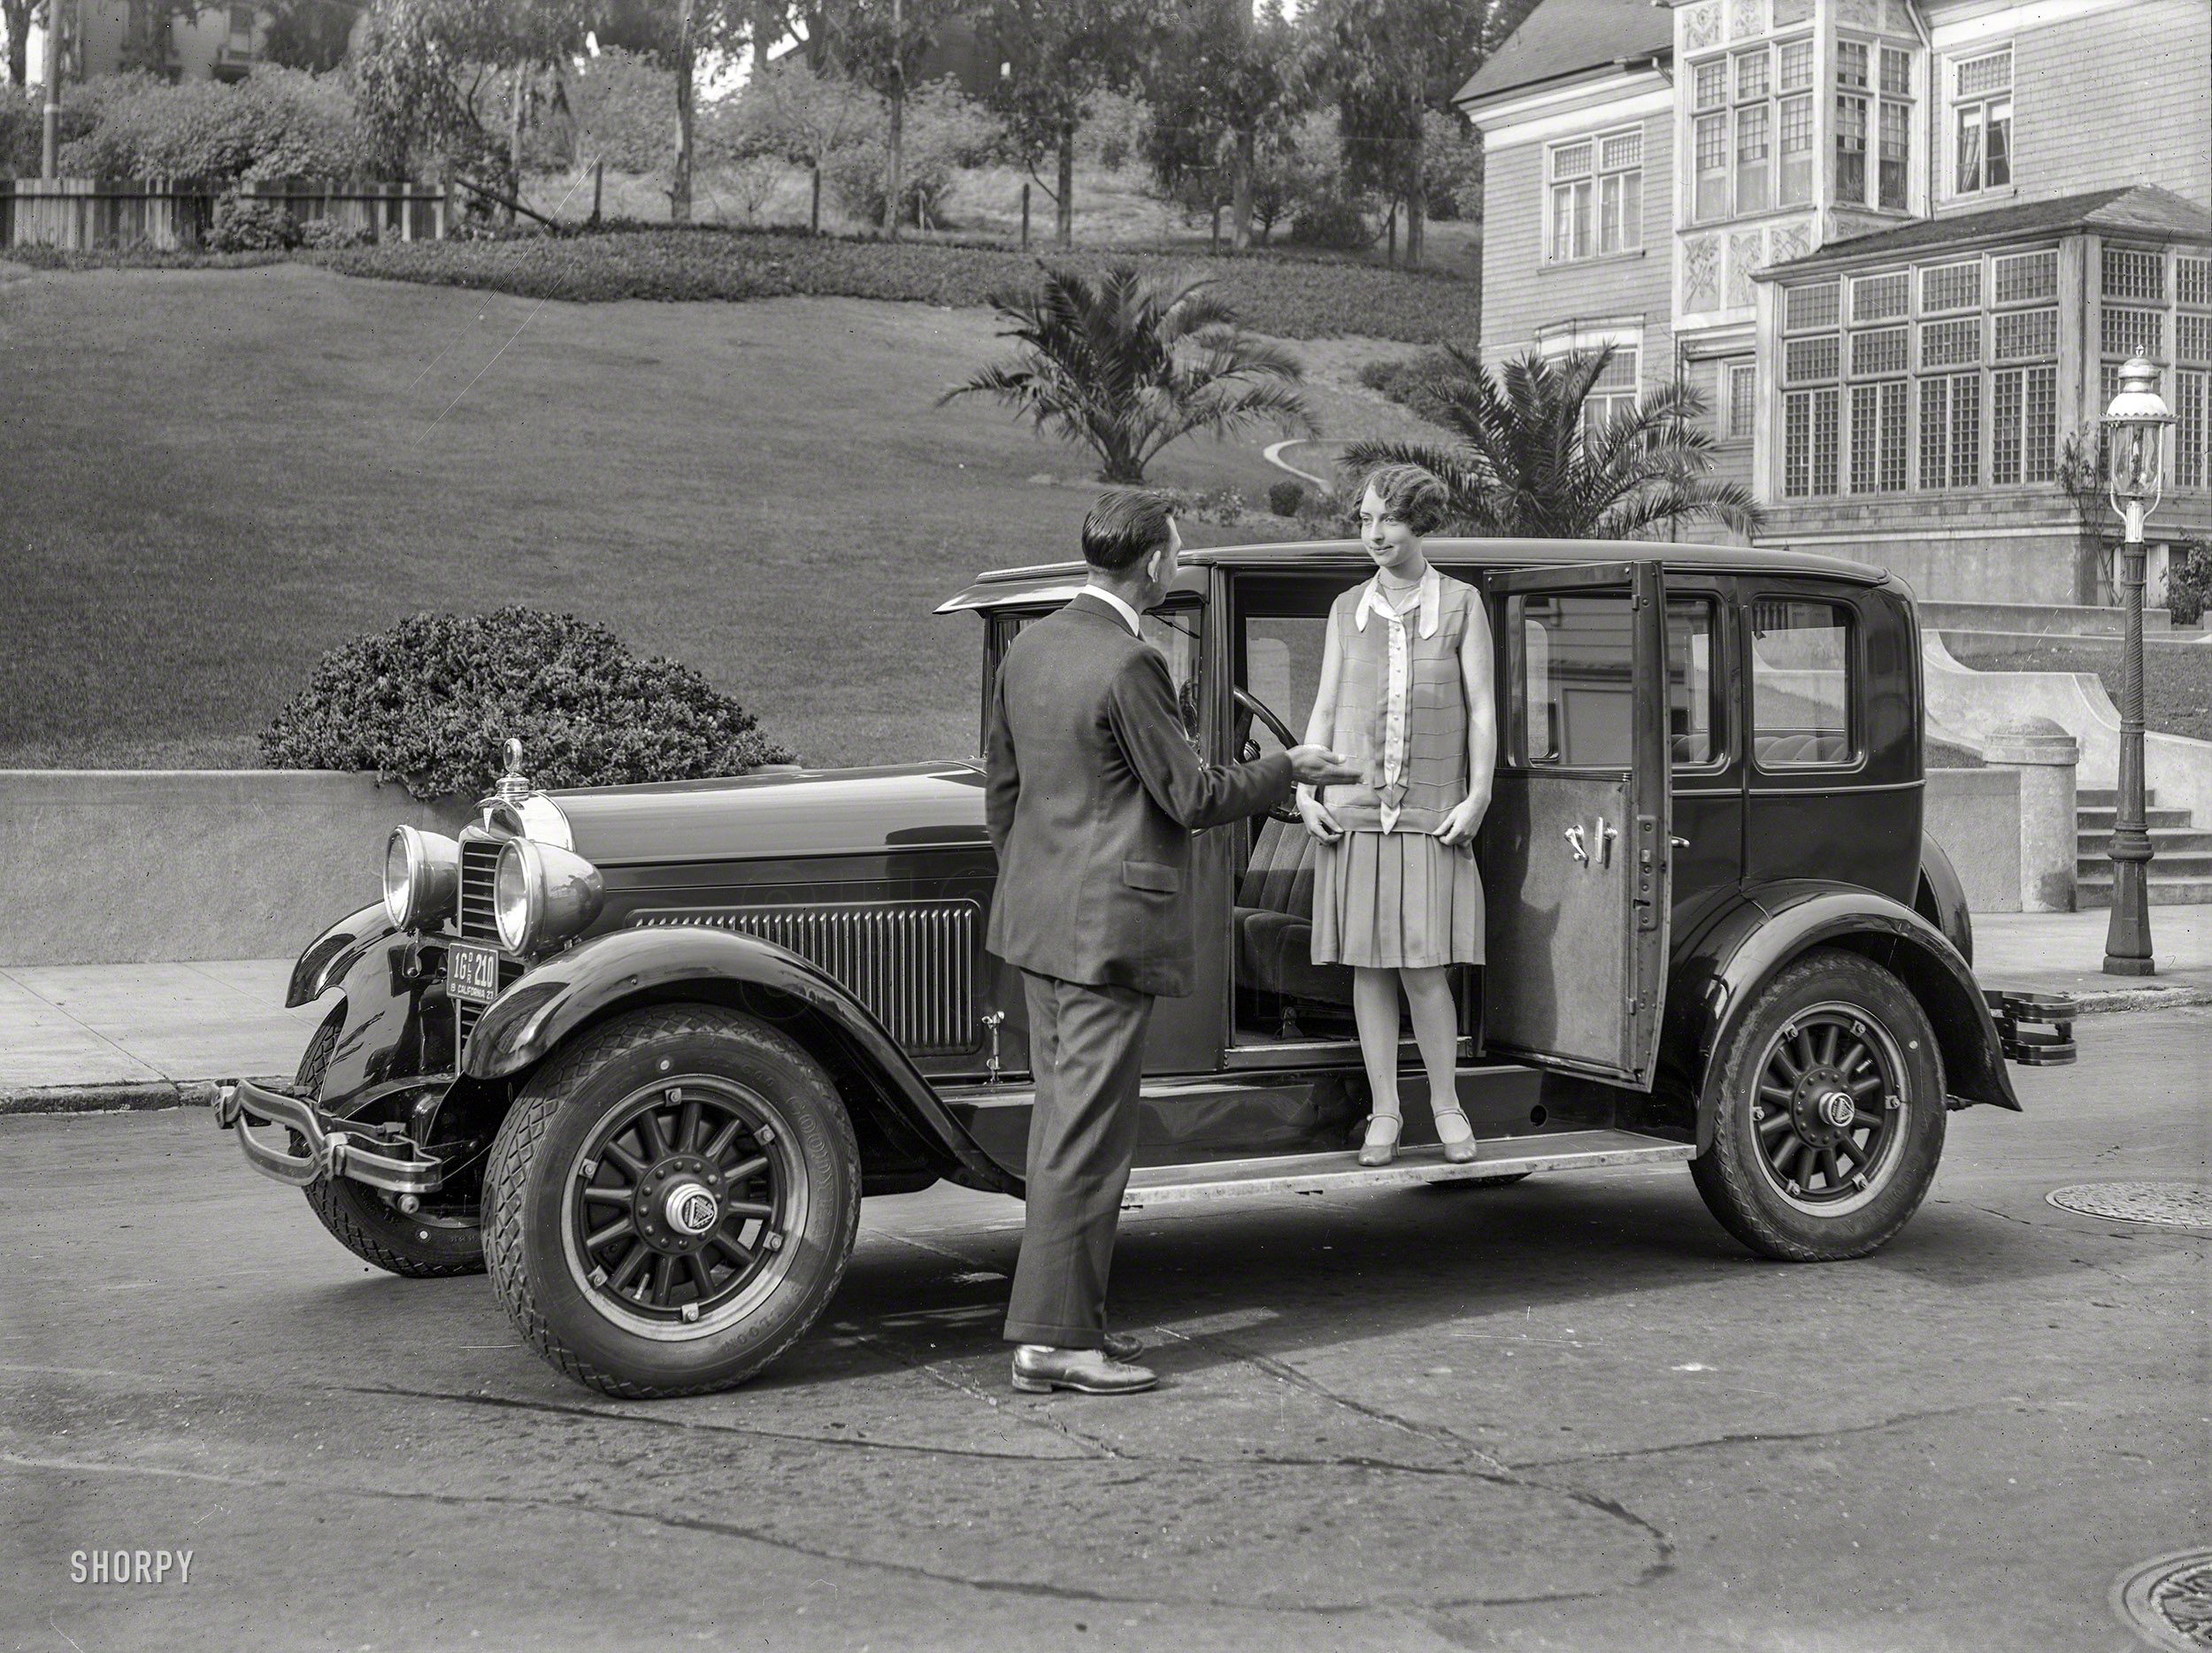 San Francisco, 1927. "Hudson Super Six." The house and its sunroom a familiar backdrop for these photos. 5x7 glass negative by Chris Helin. View full size.